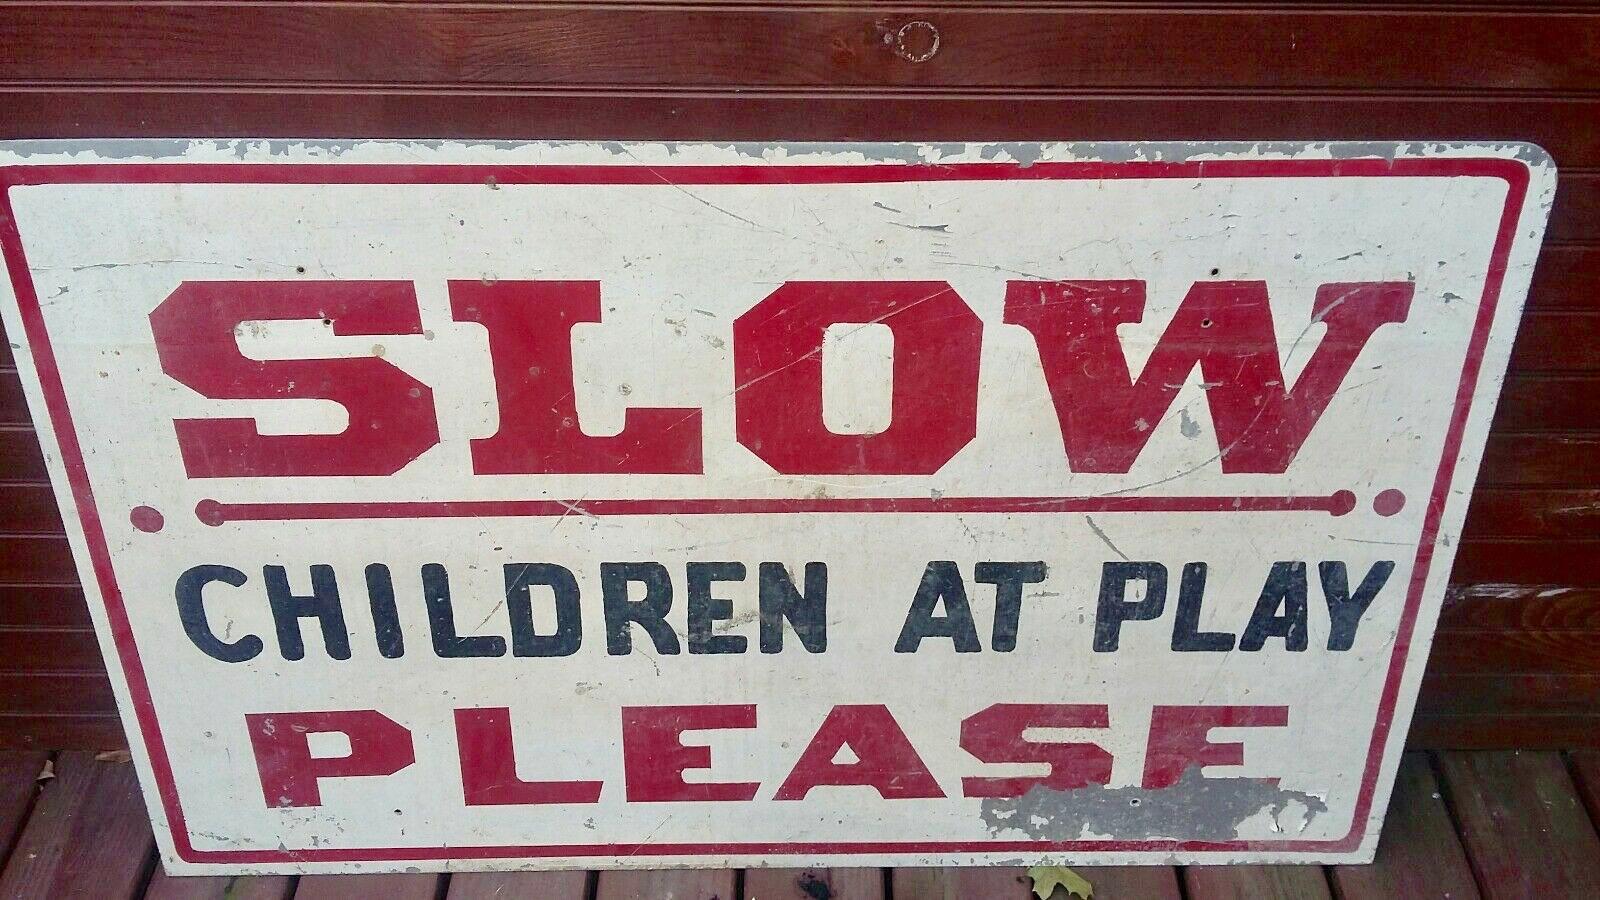 Vintage metal sign letting people know to slow down for the children playing in the street. Great coloring and graphics. Red and black lettering on white background. 4 feet wide by 3 feet tall.